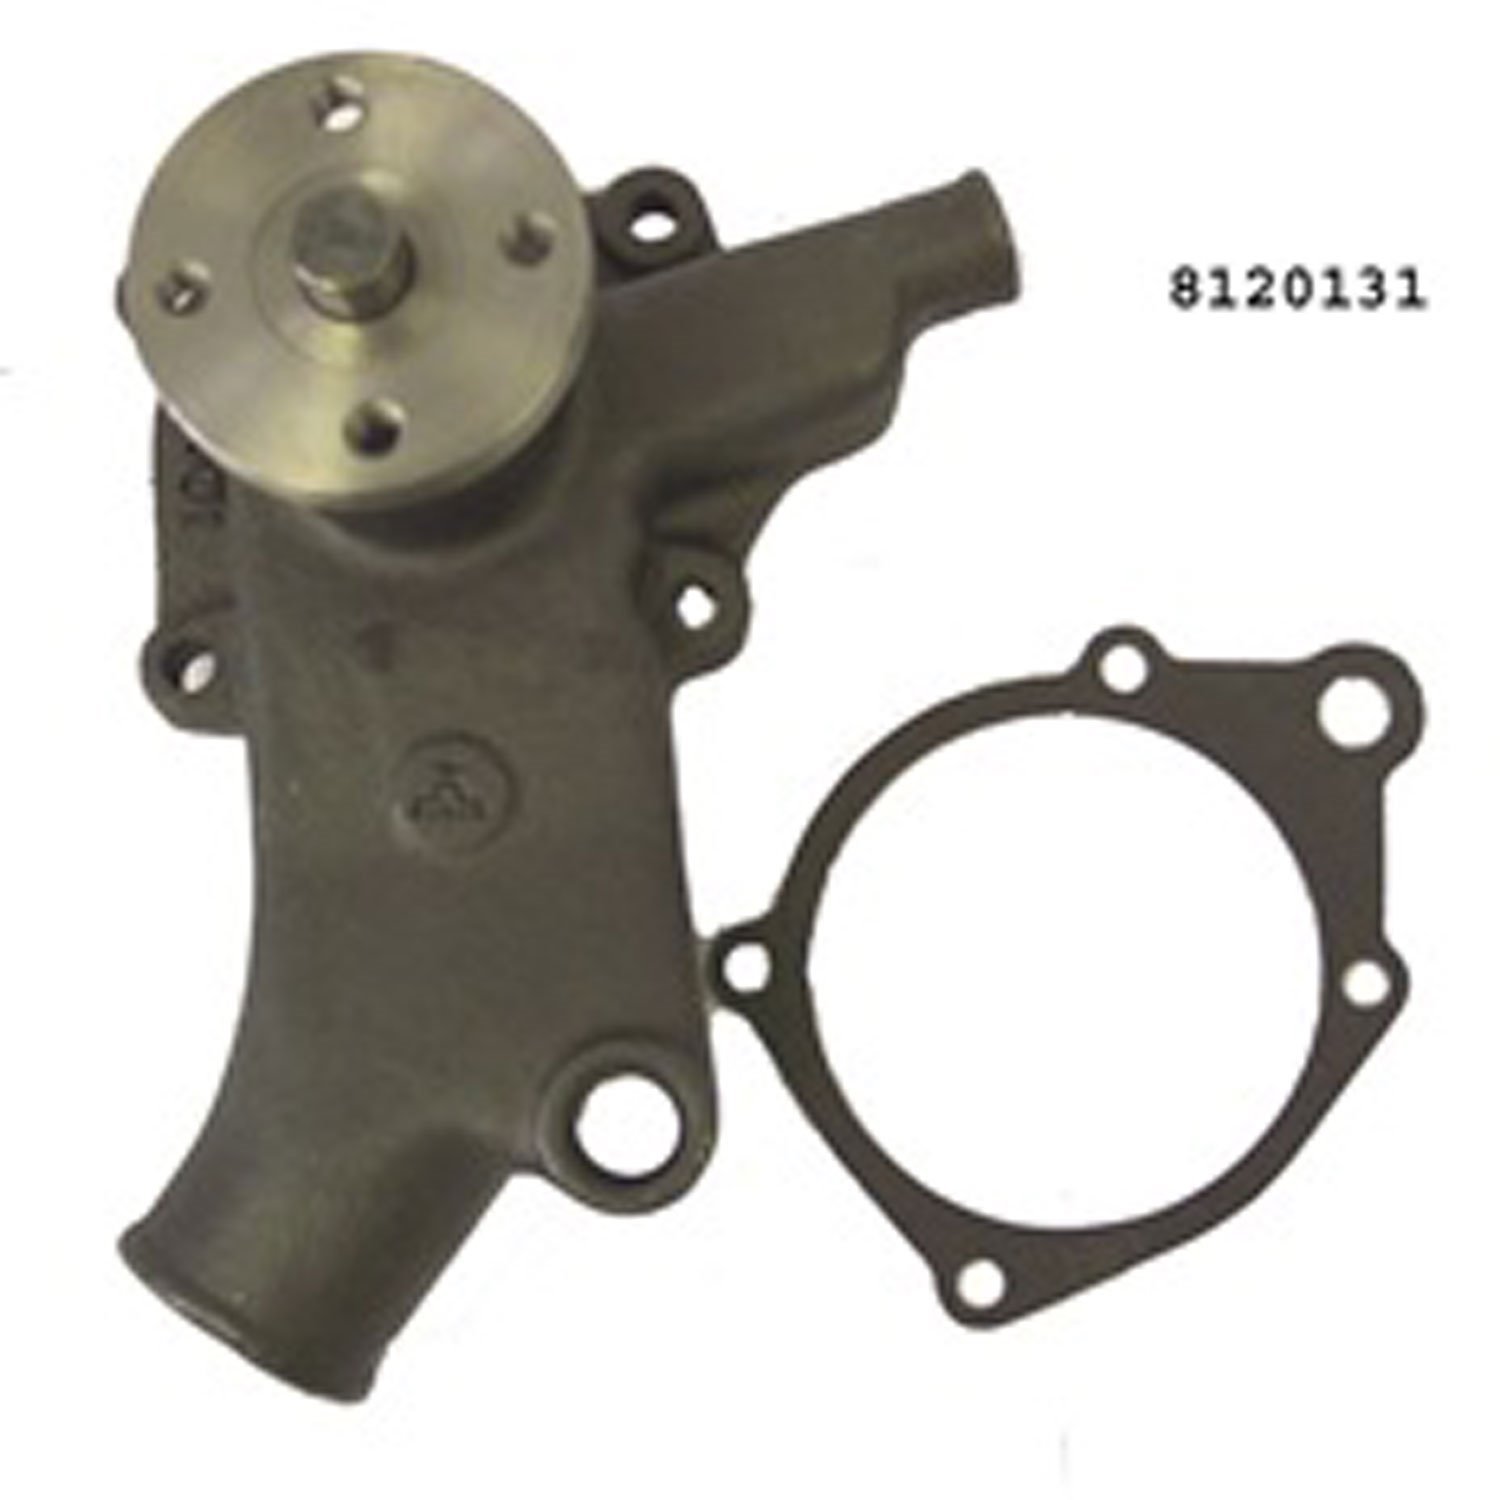 Replacement water pump from Omix-ADA, Fits 72-74 Jeep